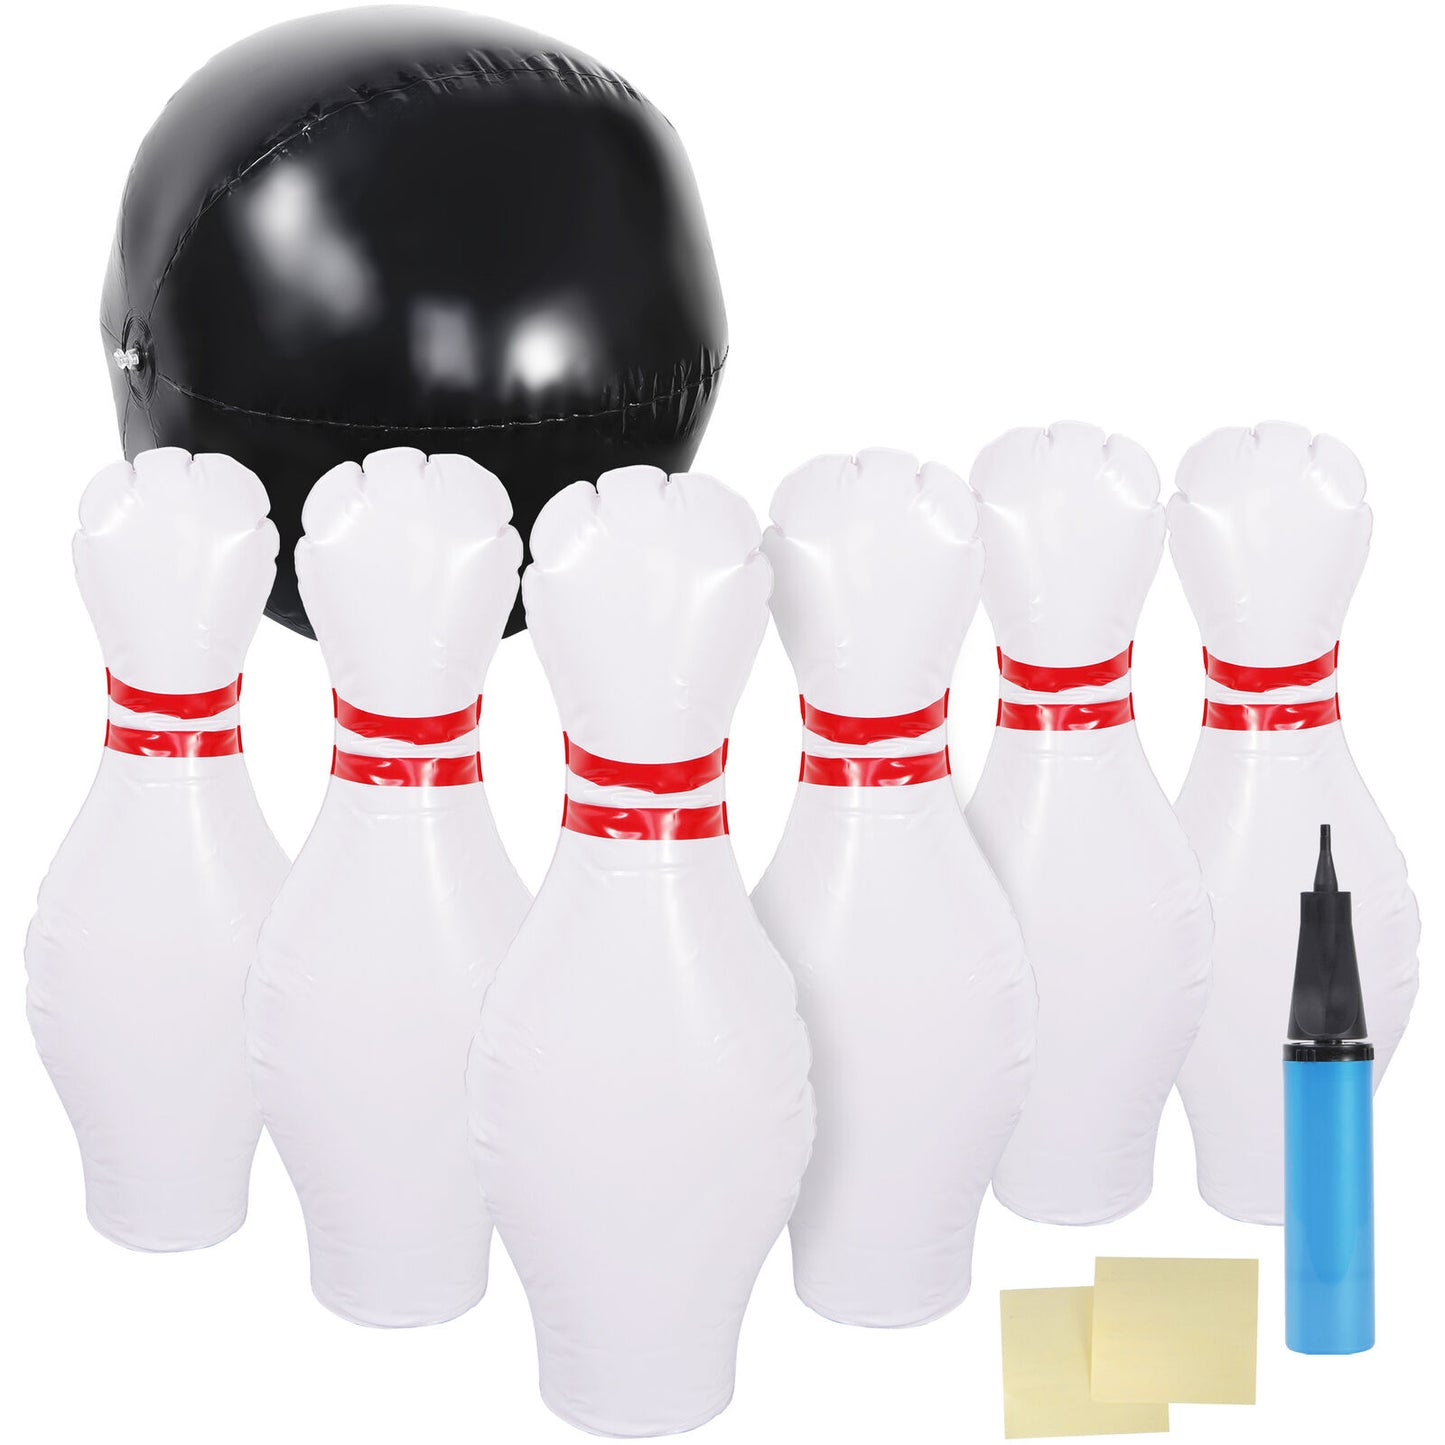 Kids Size Foam Bowling Set Soft Sturdy Bowling Set for Kids Indoor/Outdoor Games